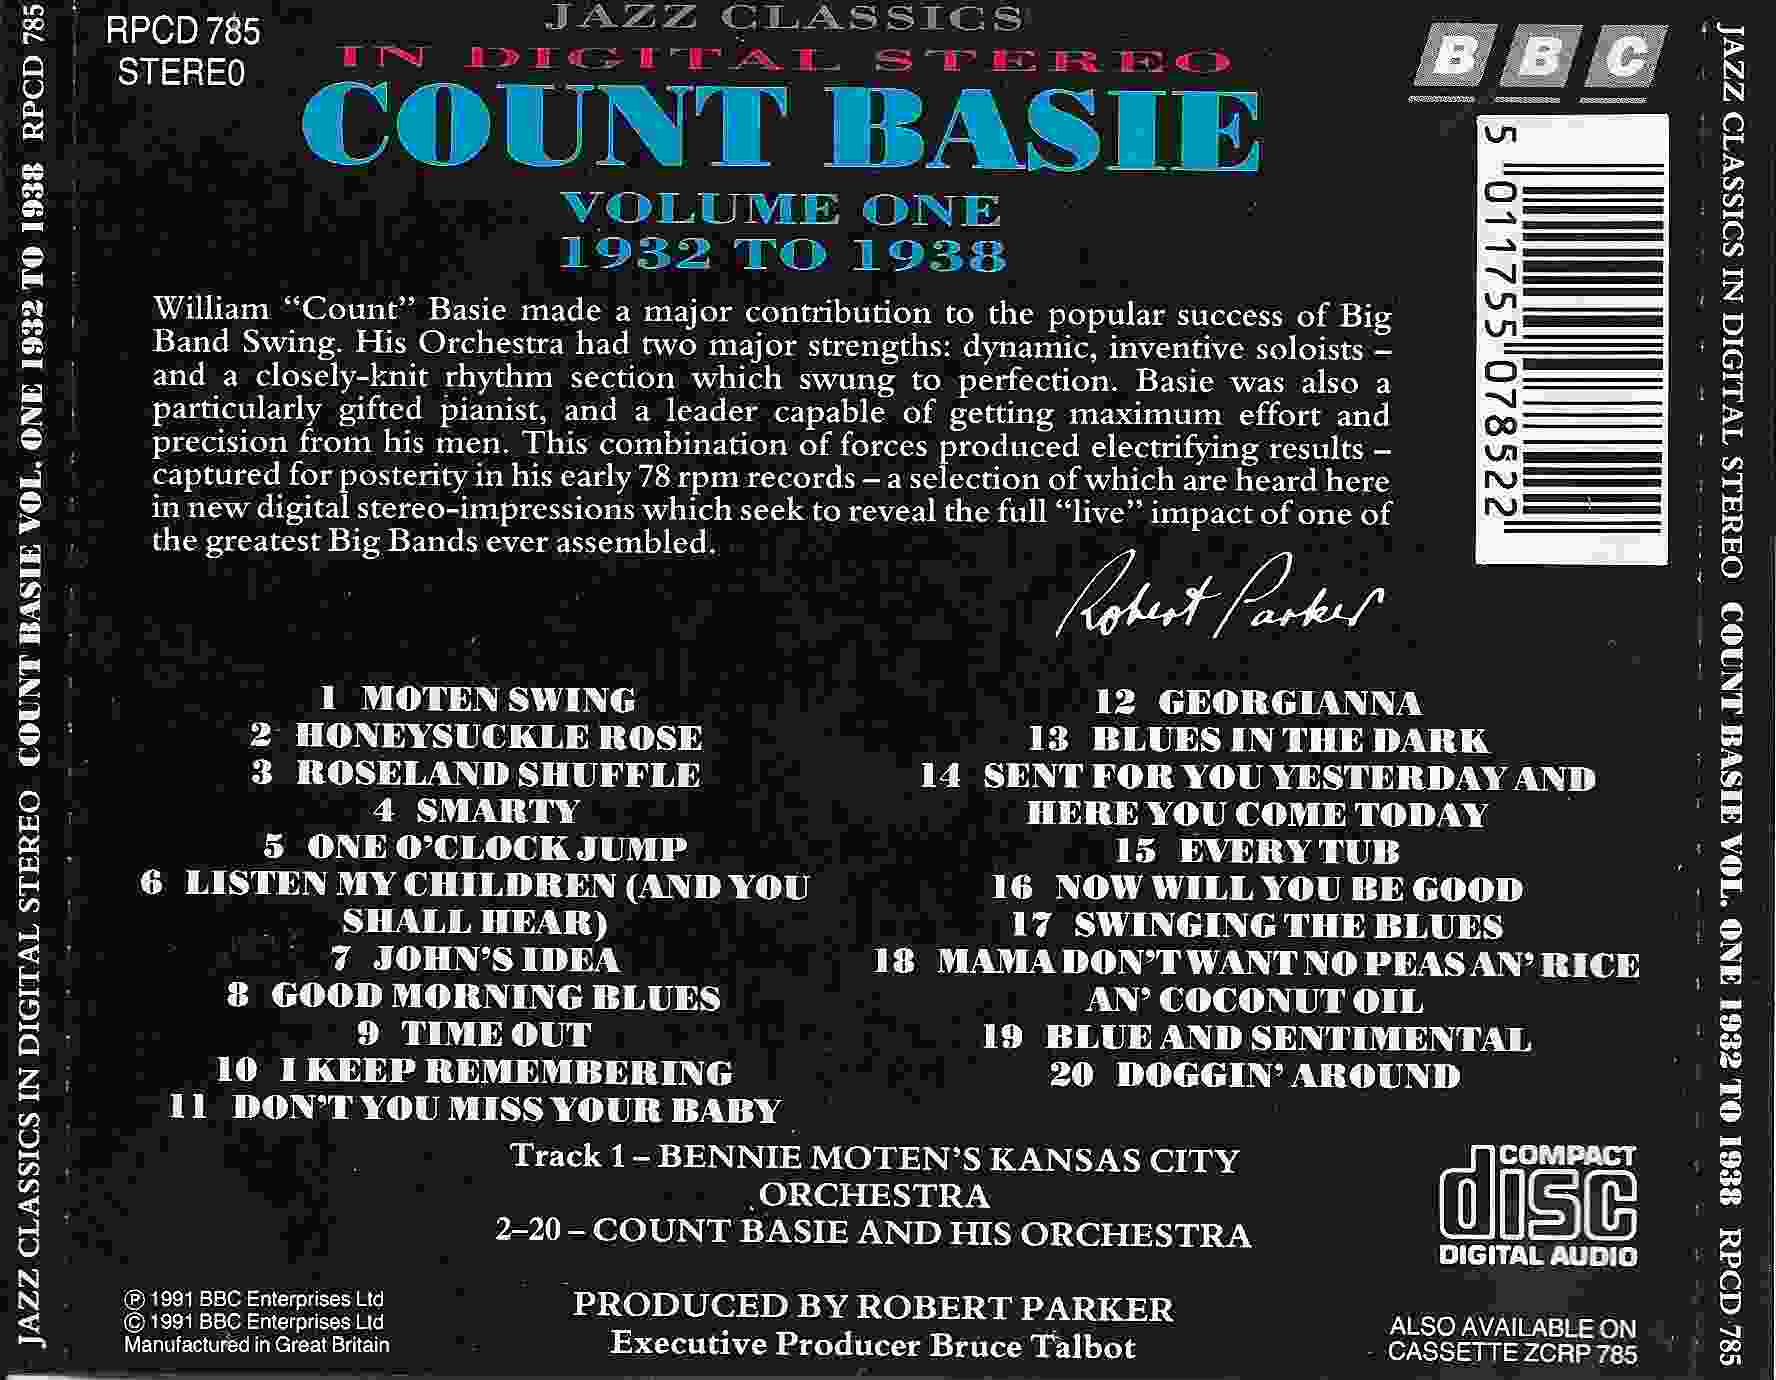 Picture of RPCD 785 Count Basie - Volume one 1932 to 1938 by artist Count Basie from the BBC records and Tapes library